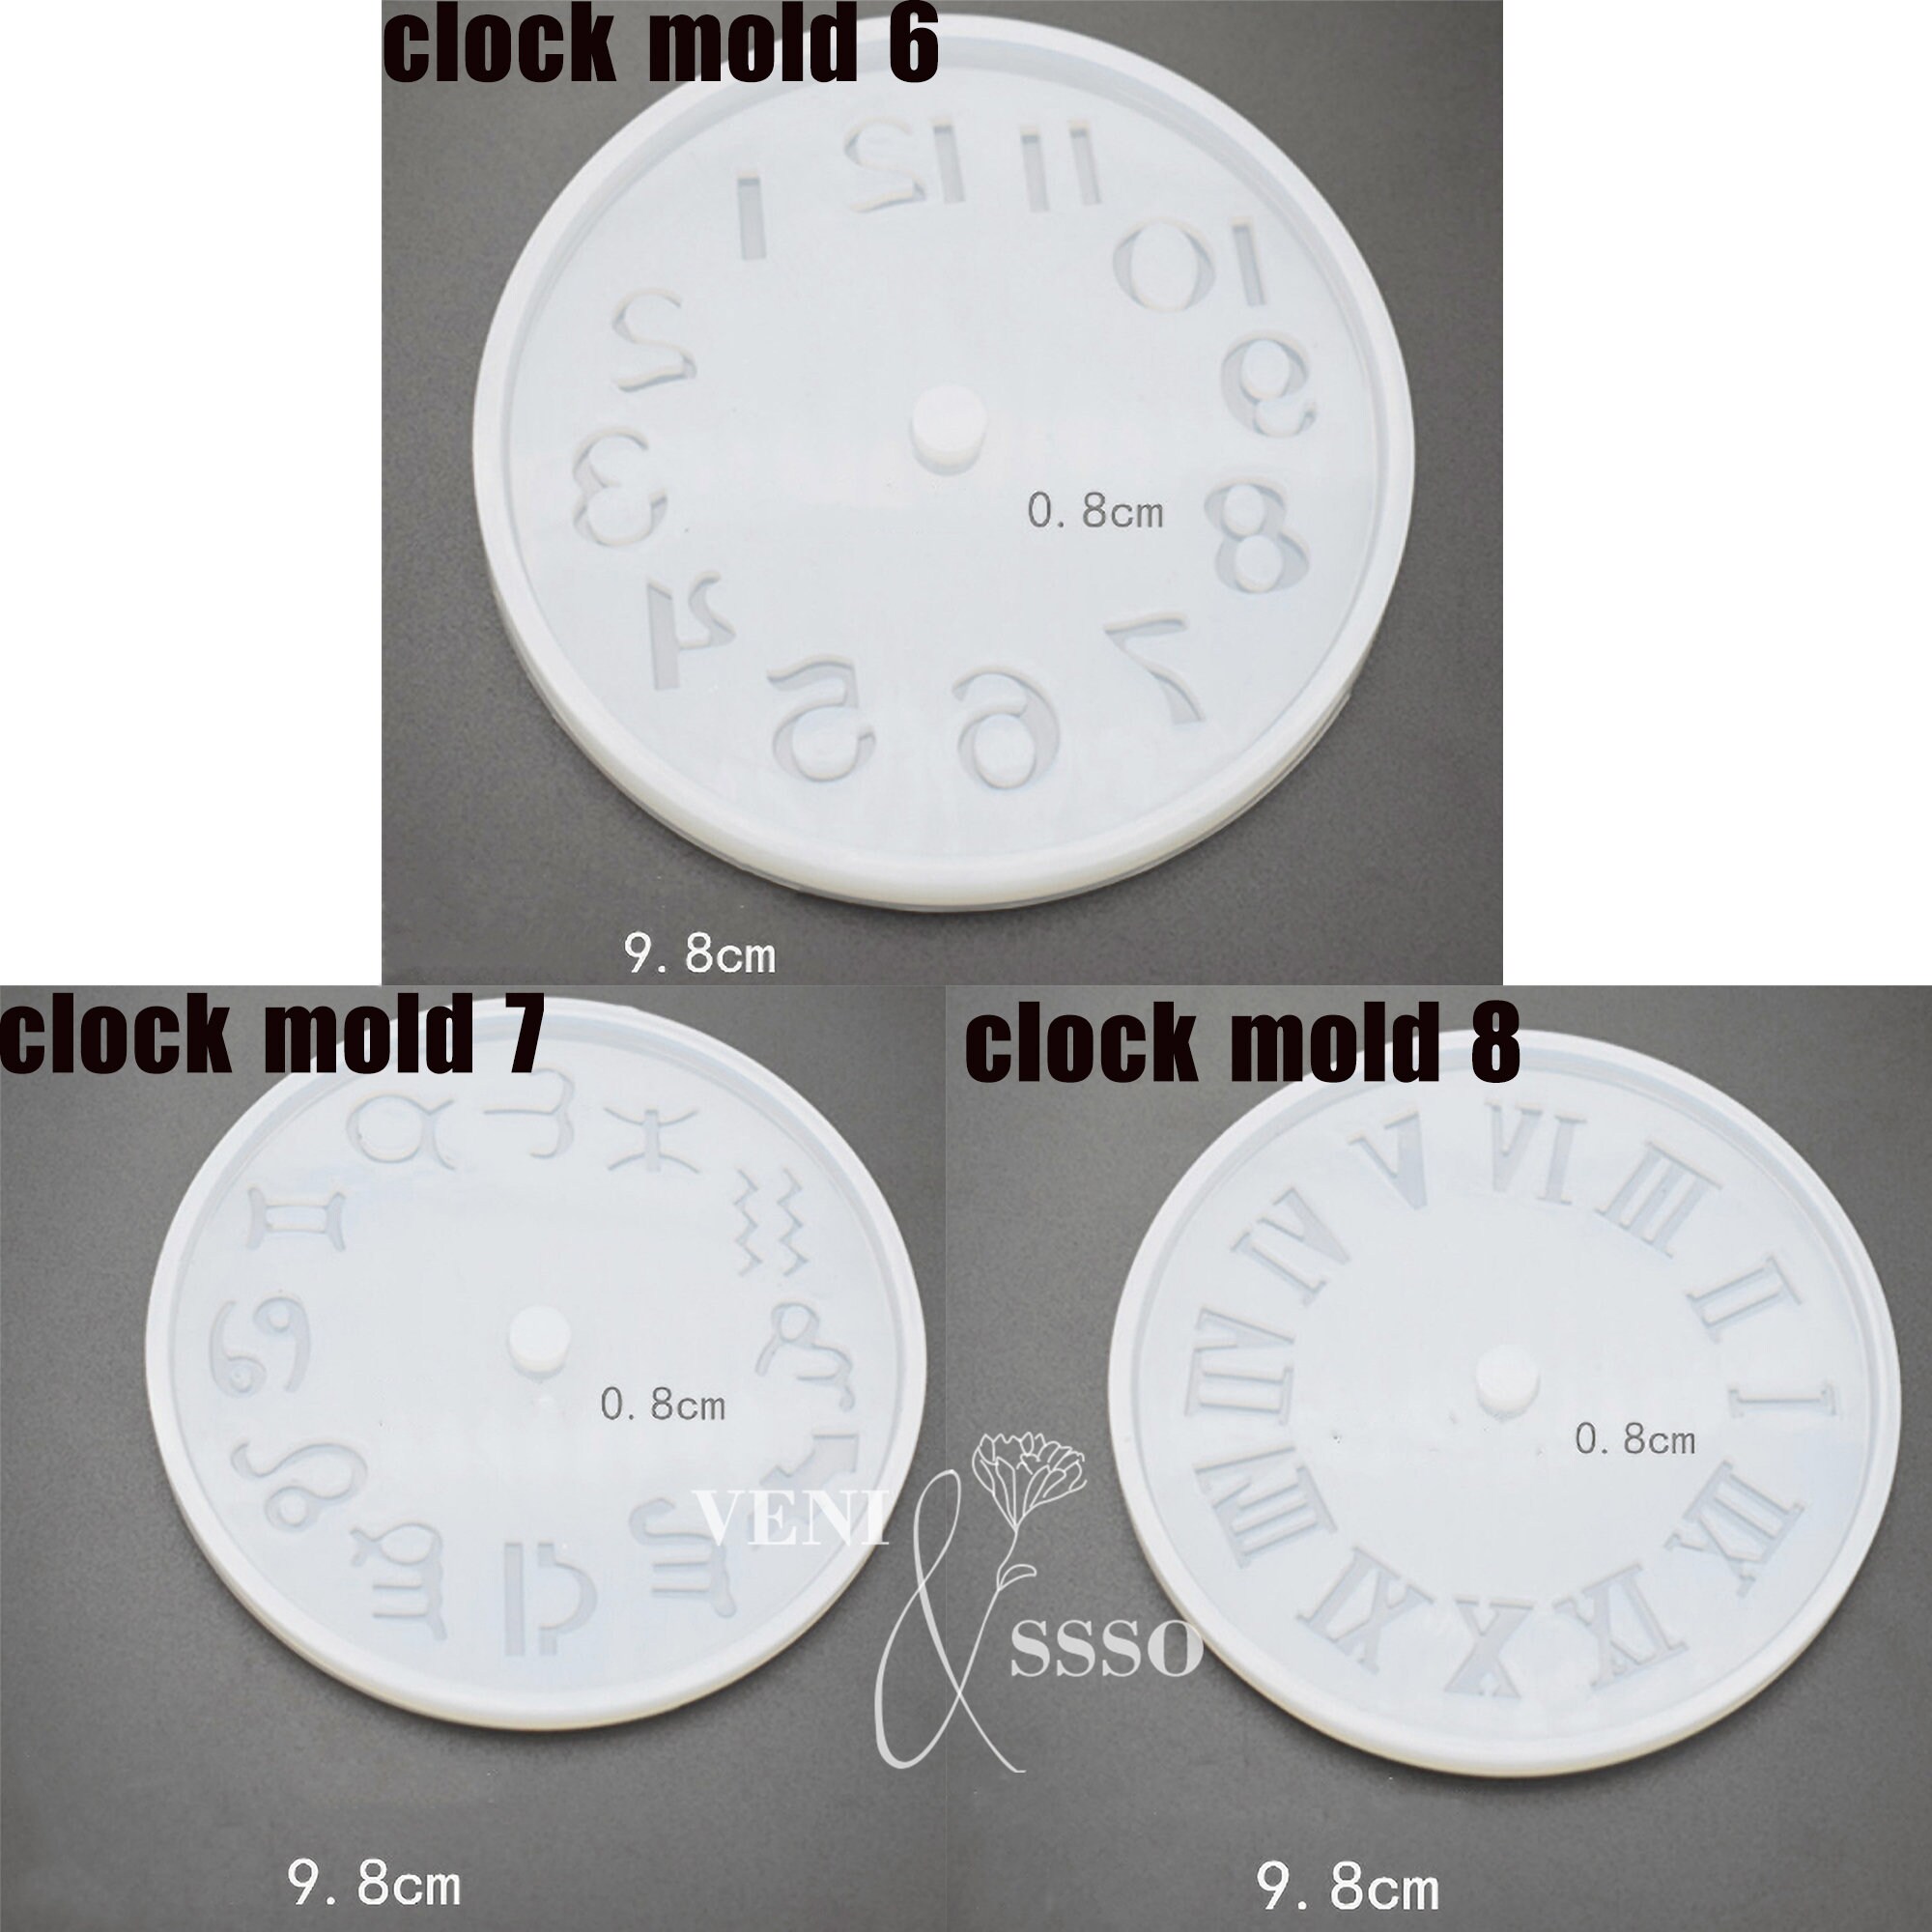 9.8cm Silicone Clock Mold Clock Resin Silicone Mold Casting Tools